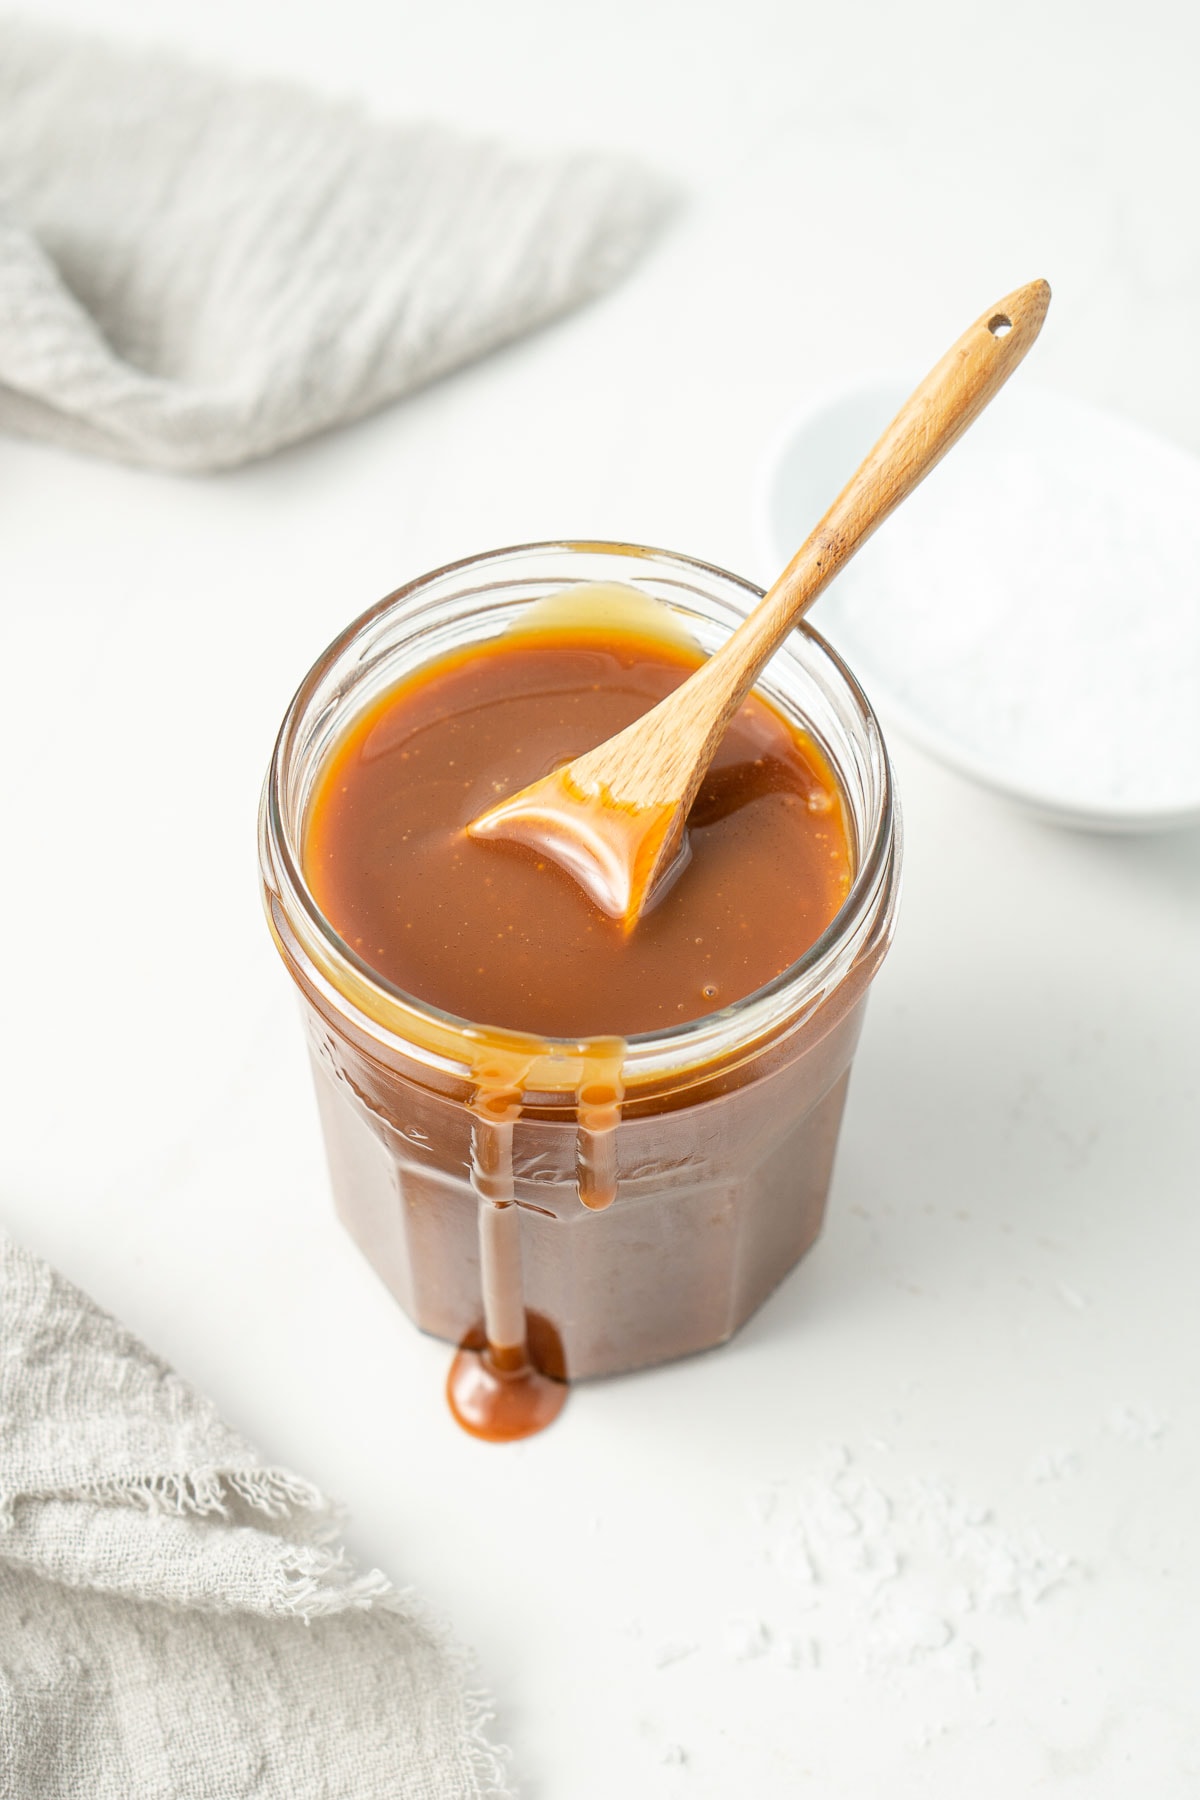 Vegan salted caramel sauce in a glass jar with a wooden spoon.